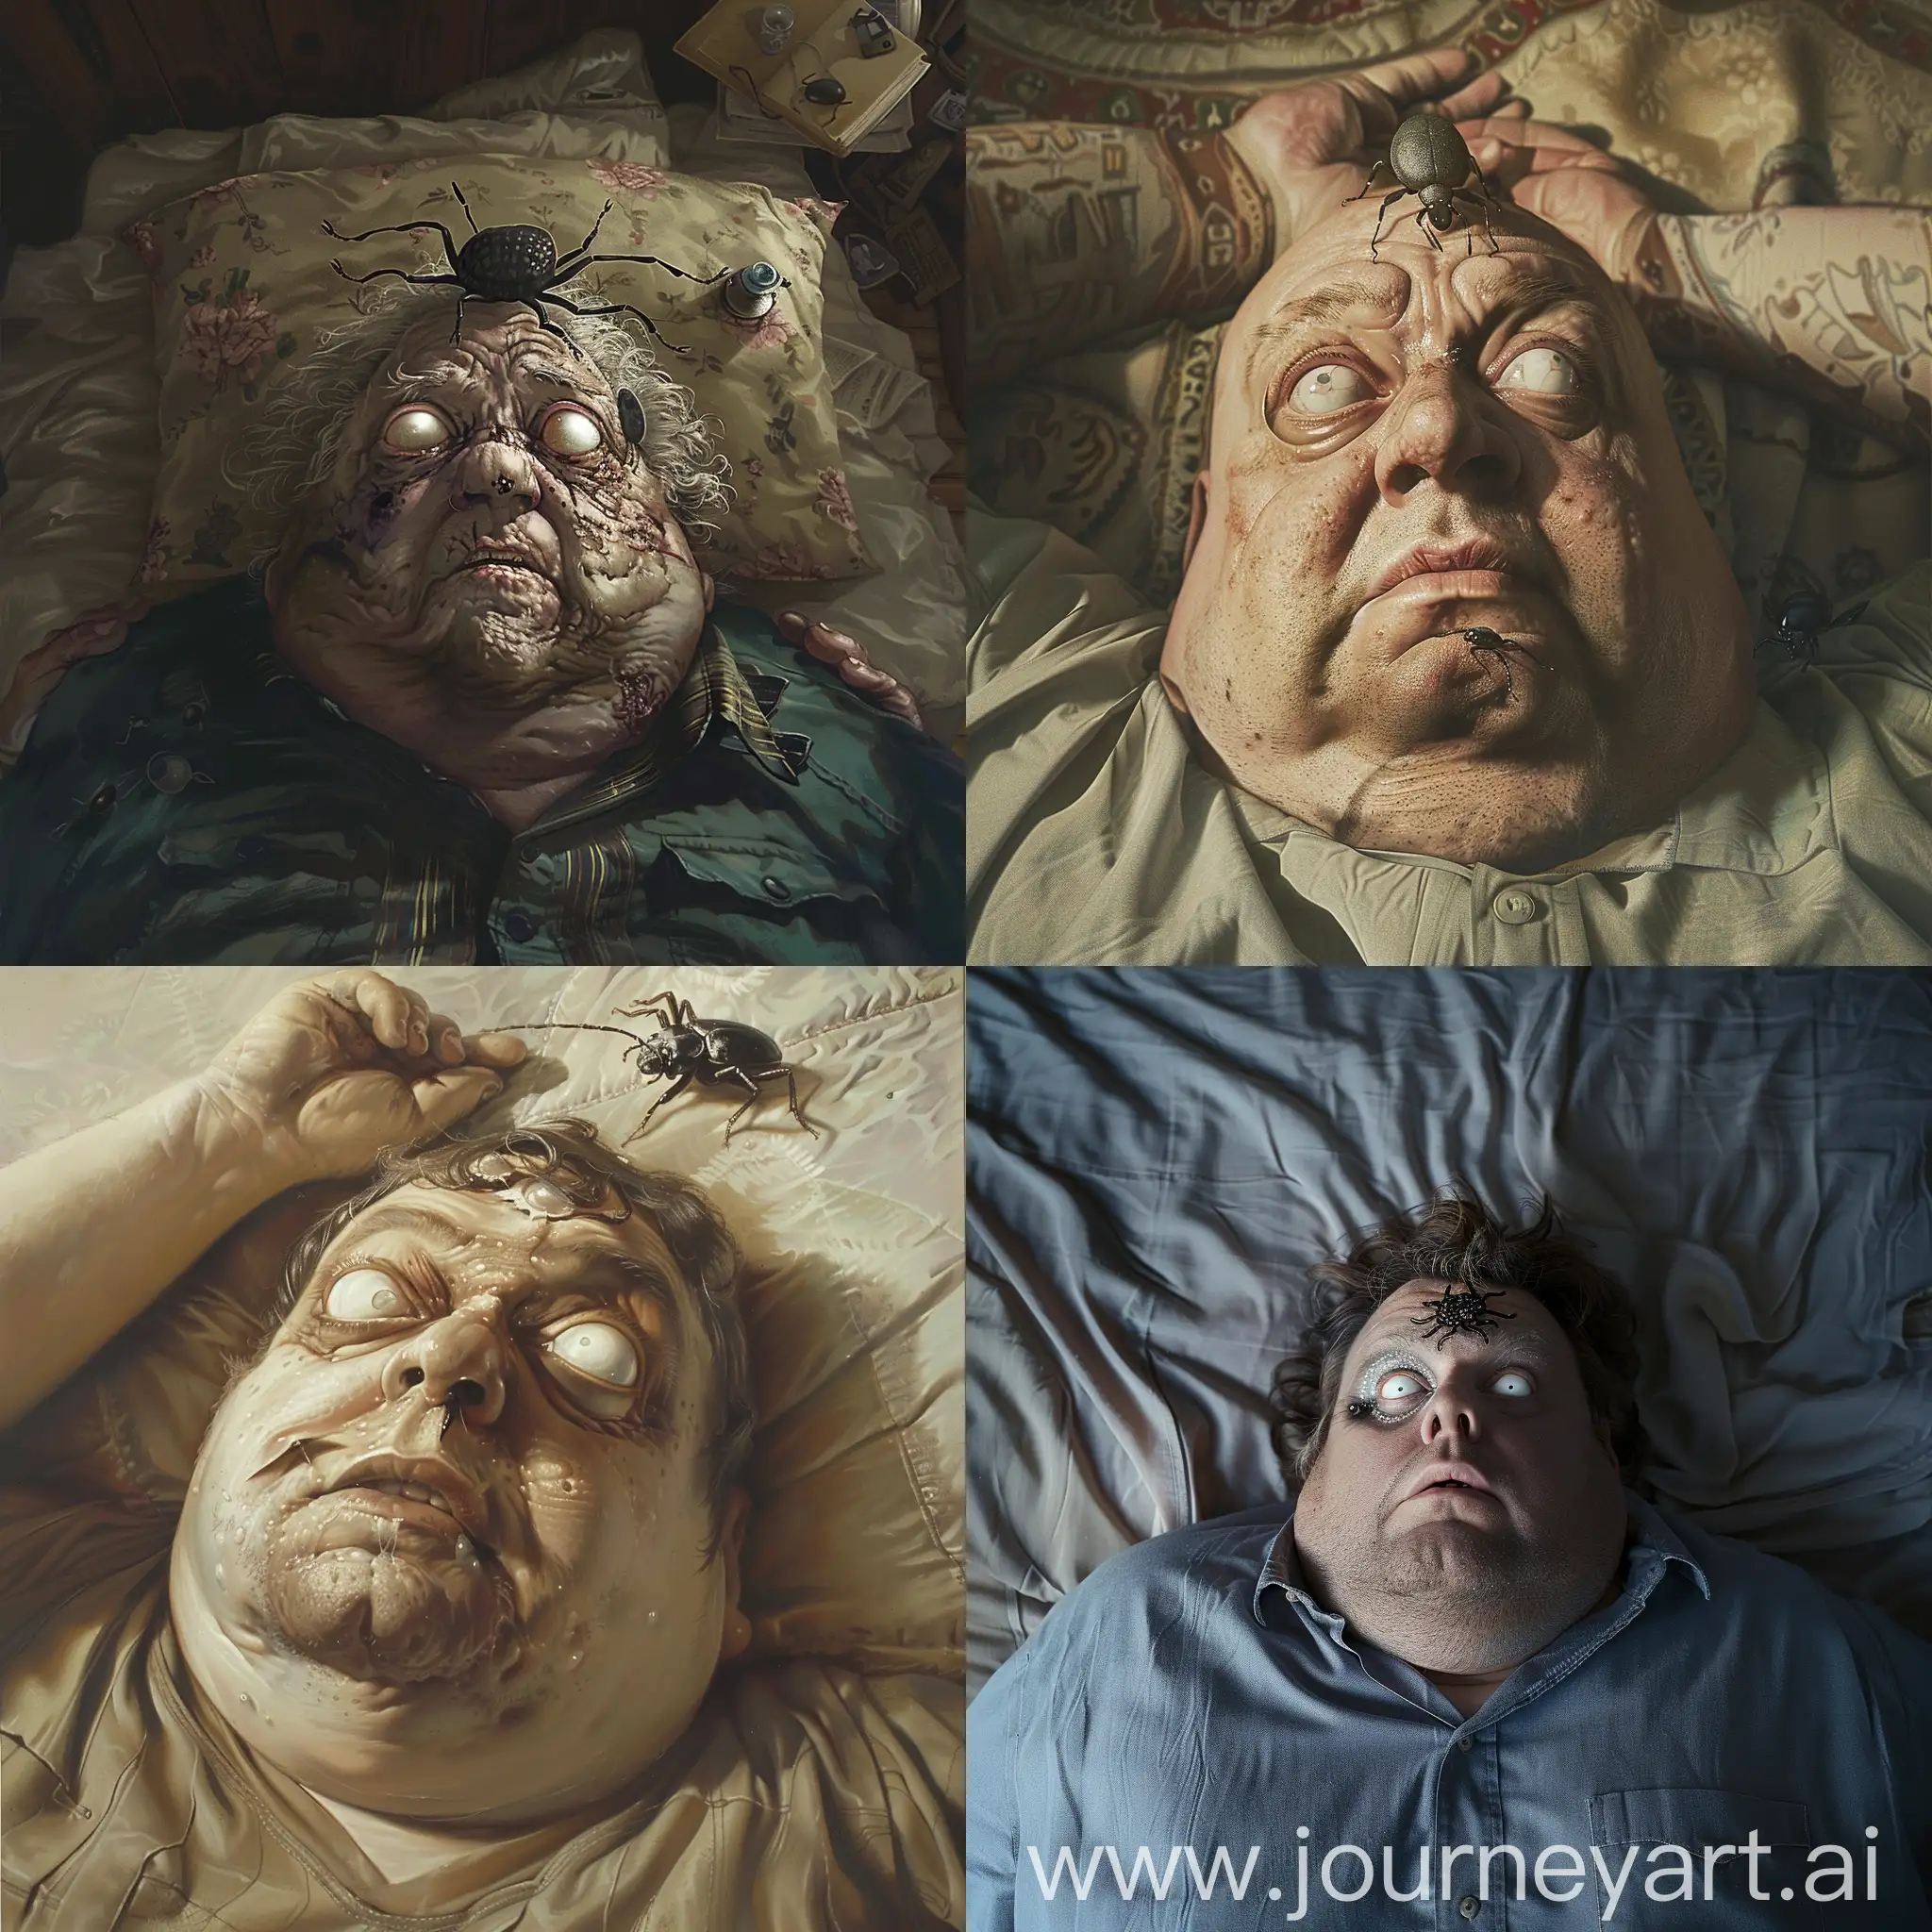 View from above, Unnatractive overweight fat man lying on a bed, overweight man with open eyes with white milky pupils, white milky eyes, overweight face, with a small black bug attached to his forehead, a small Black bug creature on his forehead, lying on a bed